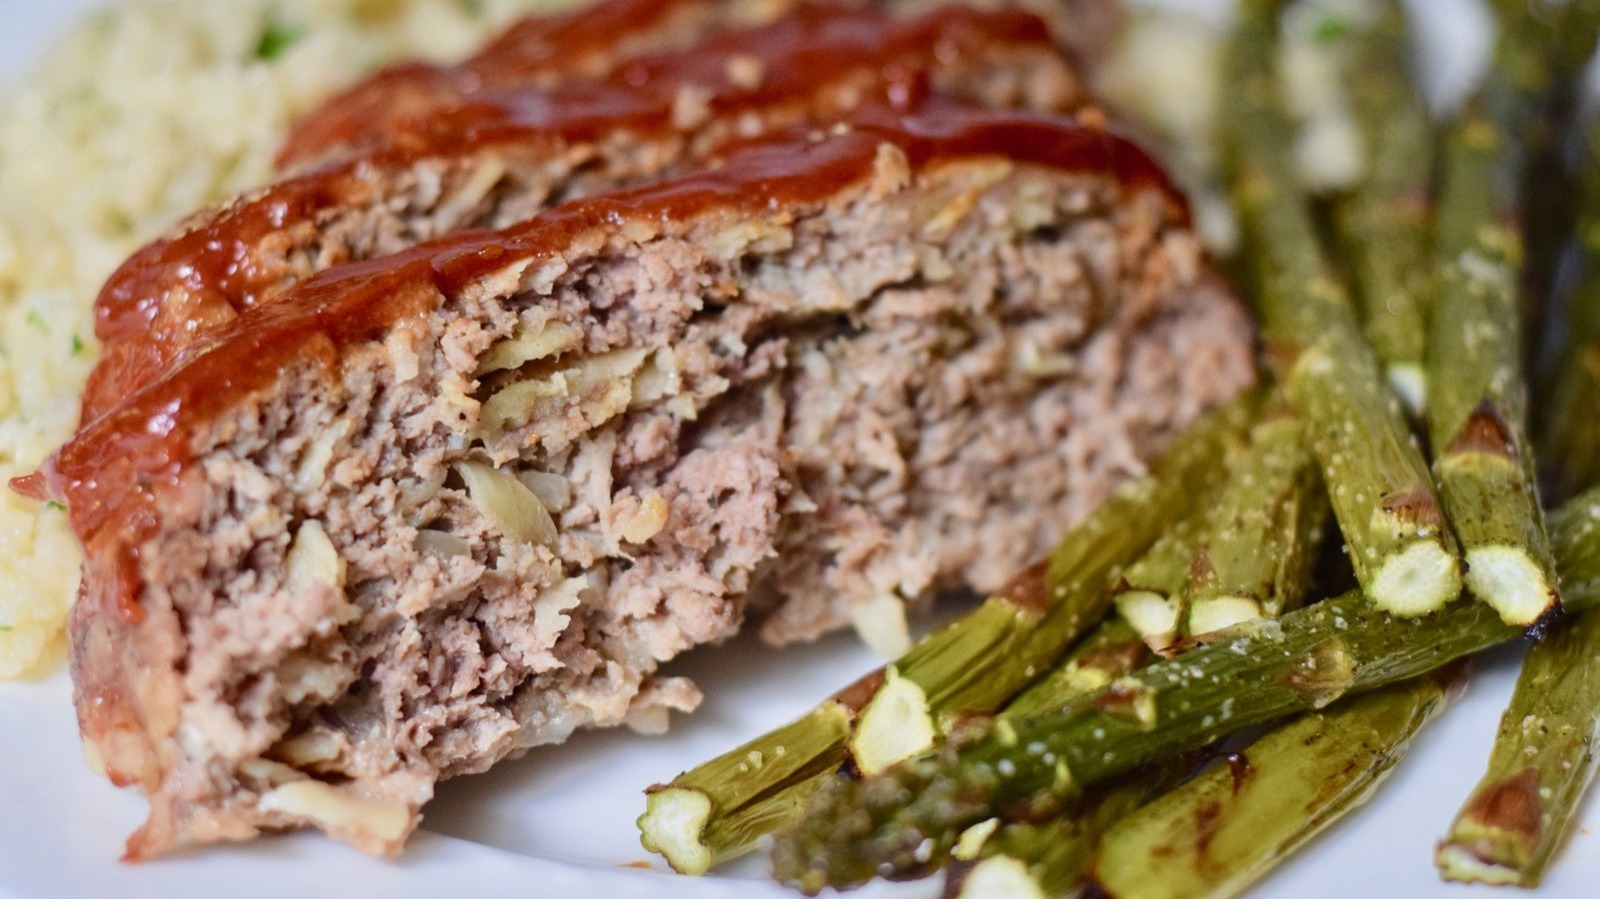 Rachael Ray's Meatloaf Recipe